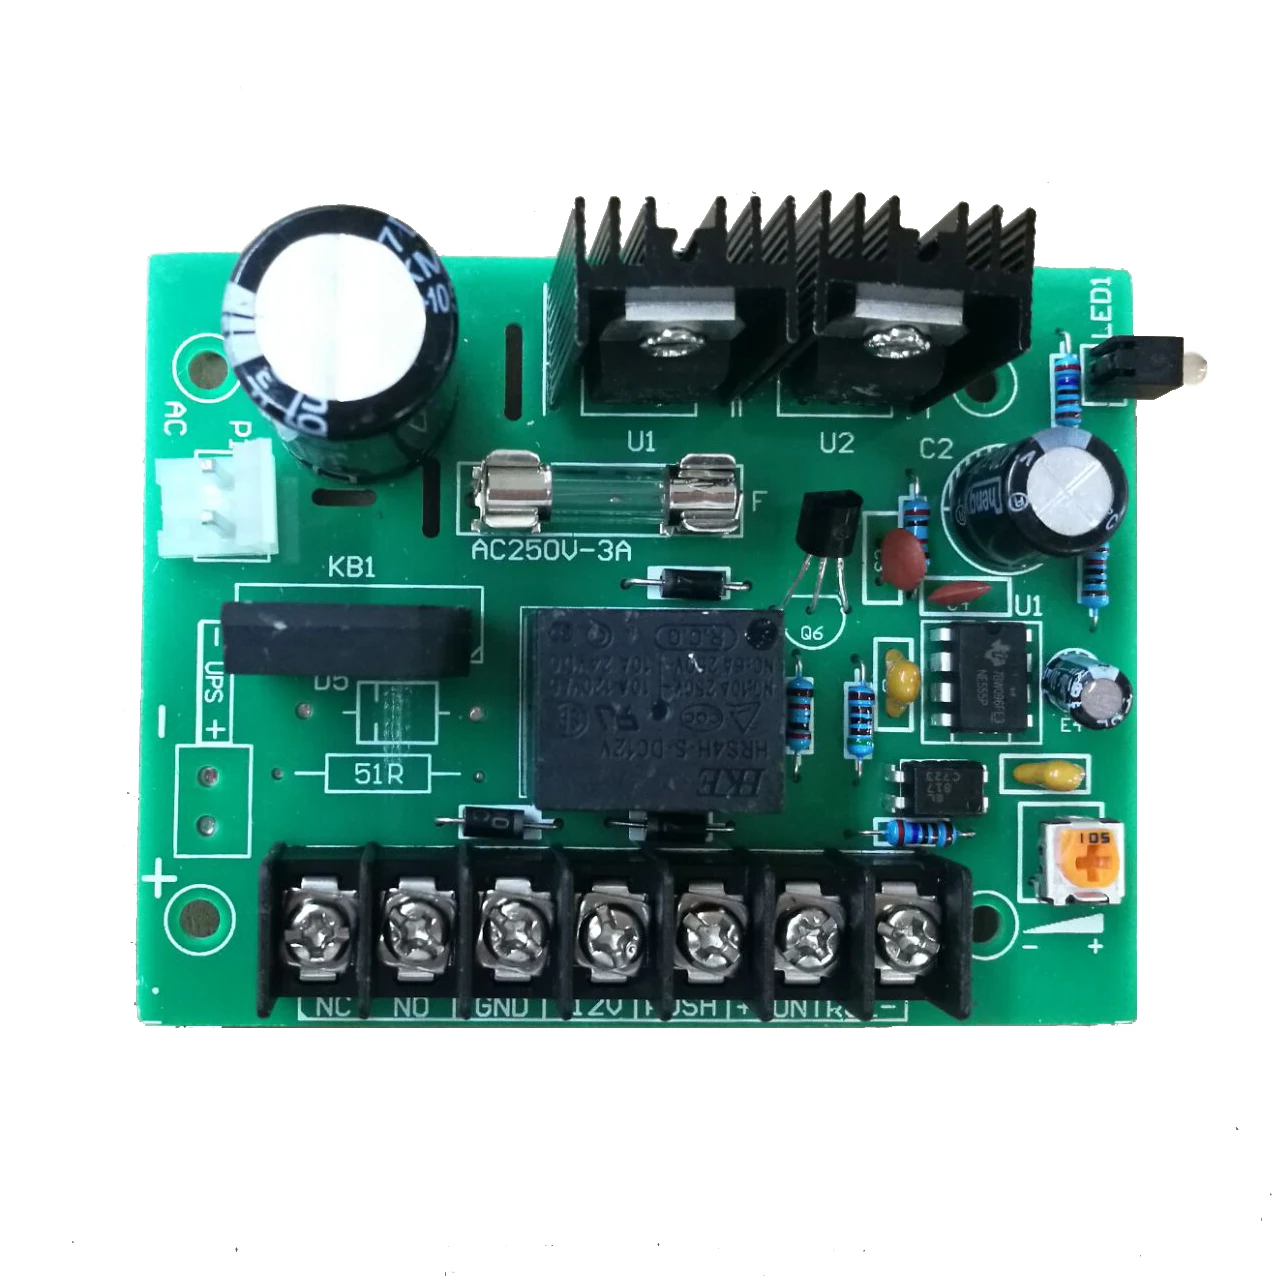 Details about   POWER UPS CIRCUIT BOARD CARD 100/24VDC D/C 9817 